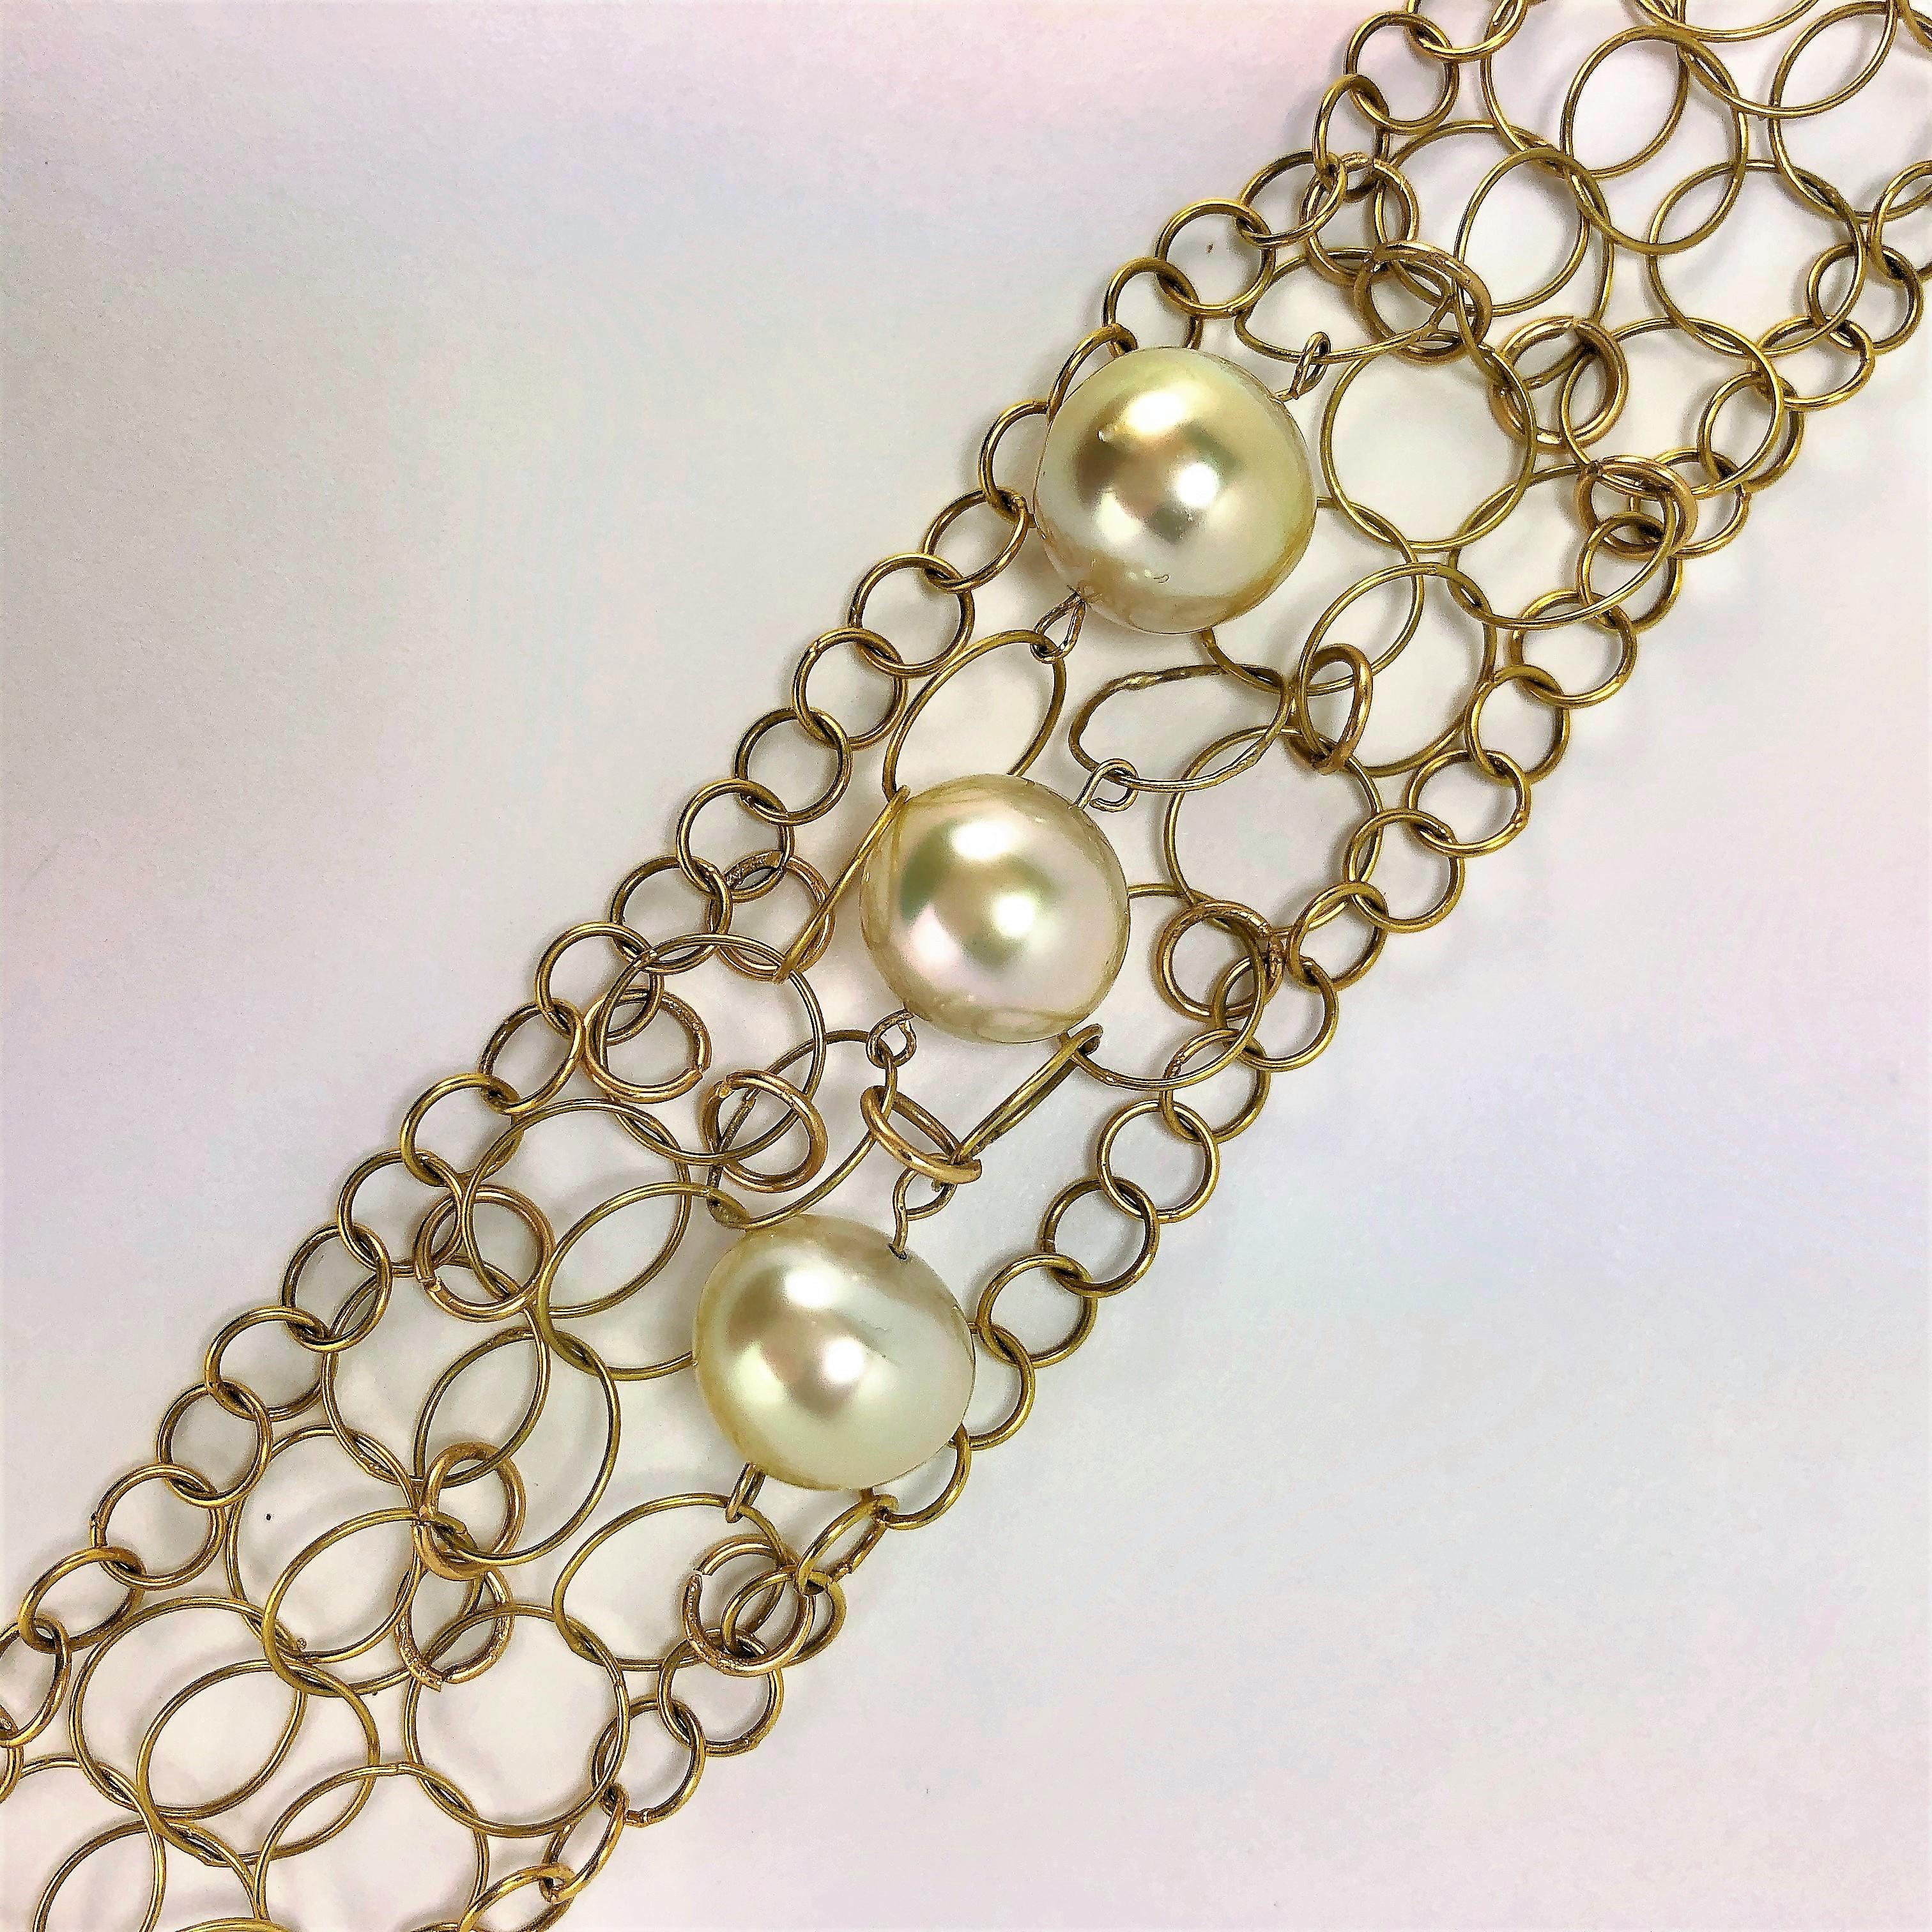 This delicate, stylish bracelet is fashioned from 14K Yellow Gold 
interlocking wire circles with three 12mm pearls featured in a diagonal 
line at the center. The unique push clasp is stamped 18K while the
intricate end pieces are stamped 14k.